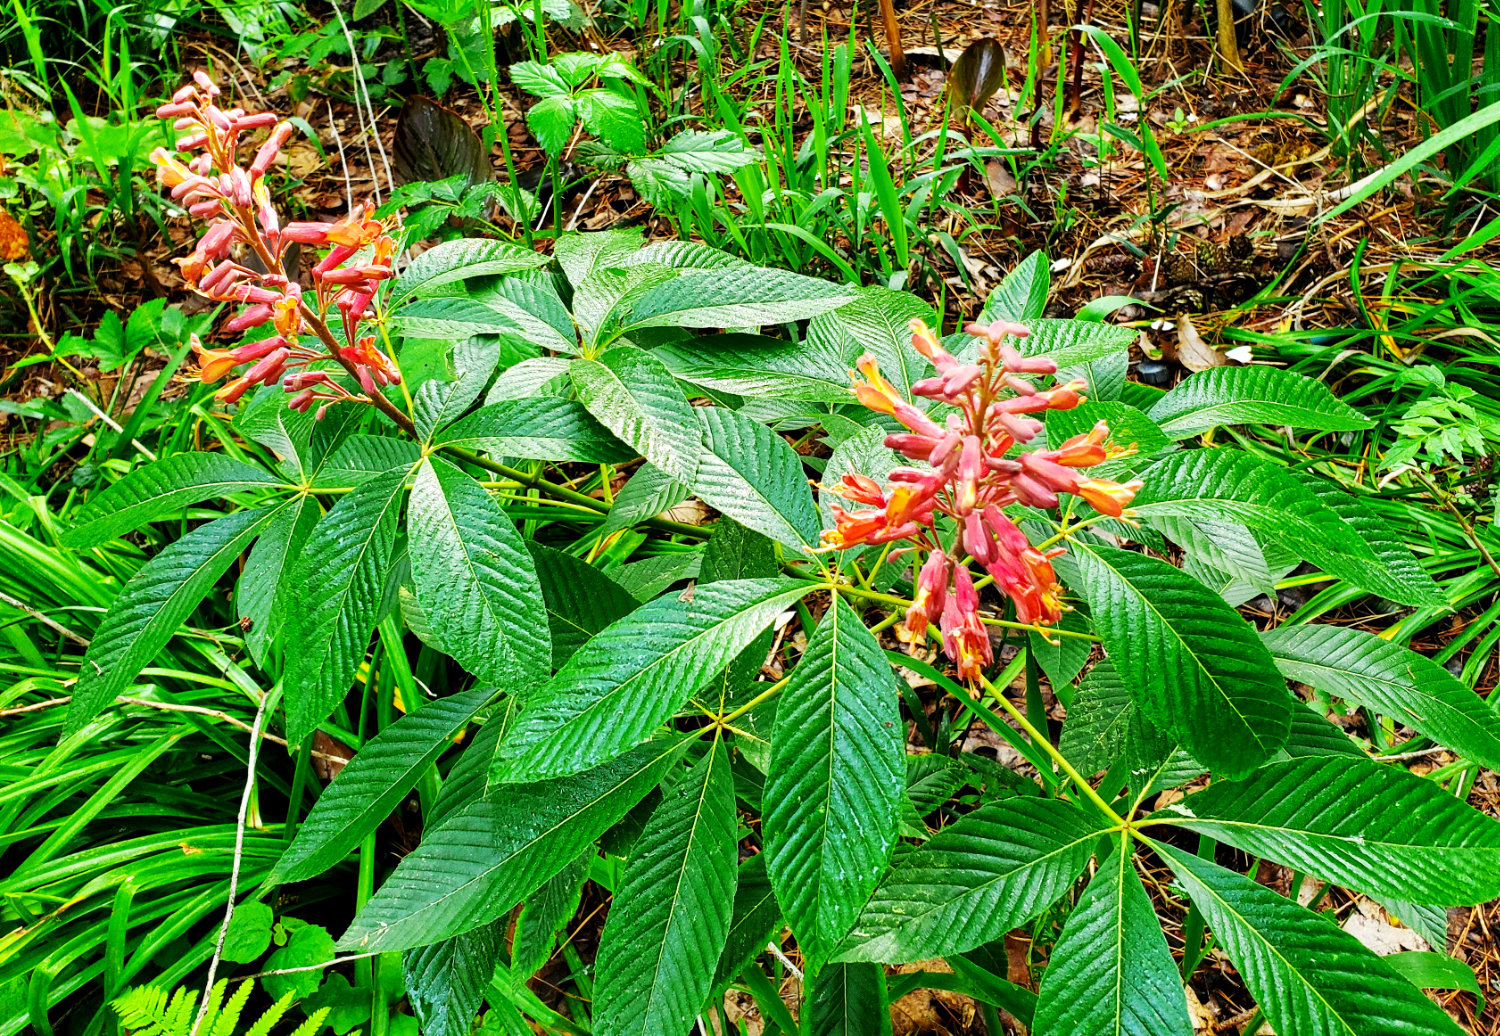 The hummingbird-pleasing red buckeye is a favorite among Texas gardeners and is expected to be among plants available for purchase during the upcoming bare root tree sale, offered by the Wood County Arboretum.